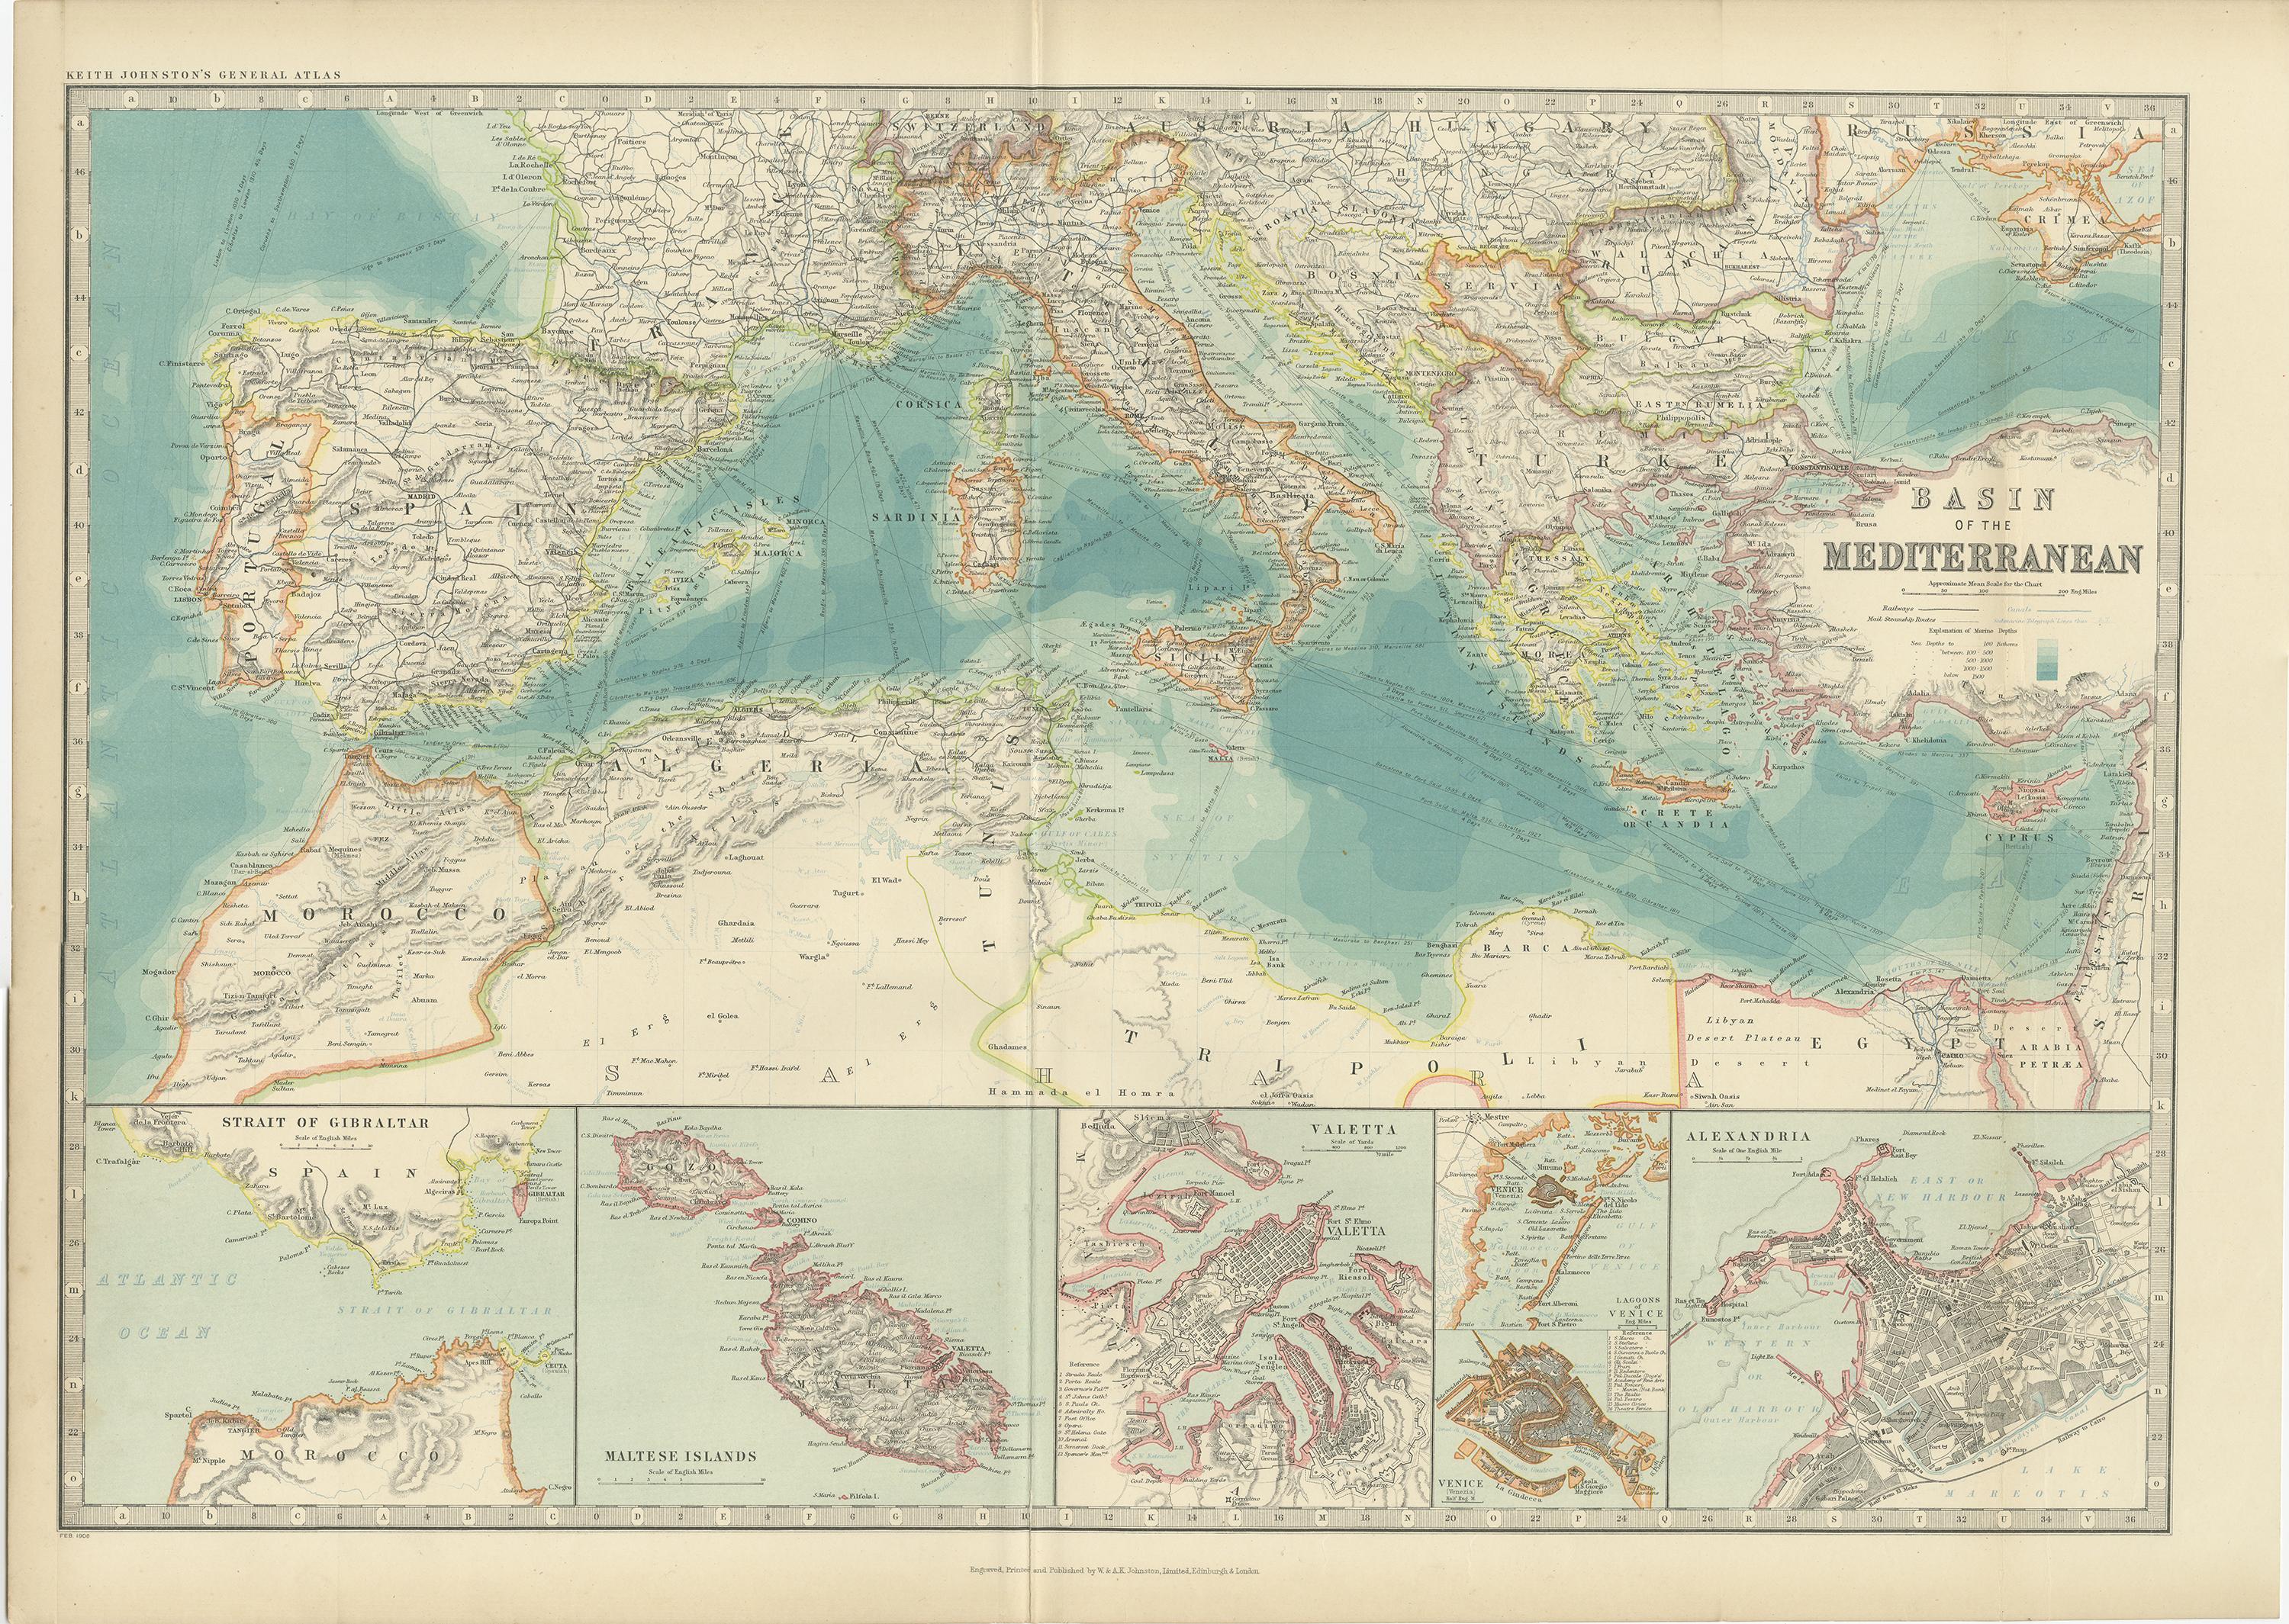 Antique map titled 'Basin of the Mediterranean'. Original antique map of the basin of the Mediterranean. With inset maps of the Strait of Gibraltar, Morocco, Maltese Islands, Valetta, Venice and Alexandria. This map originates from the ‘Royal Atlas